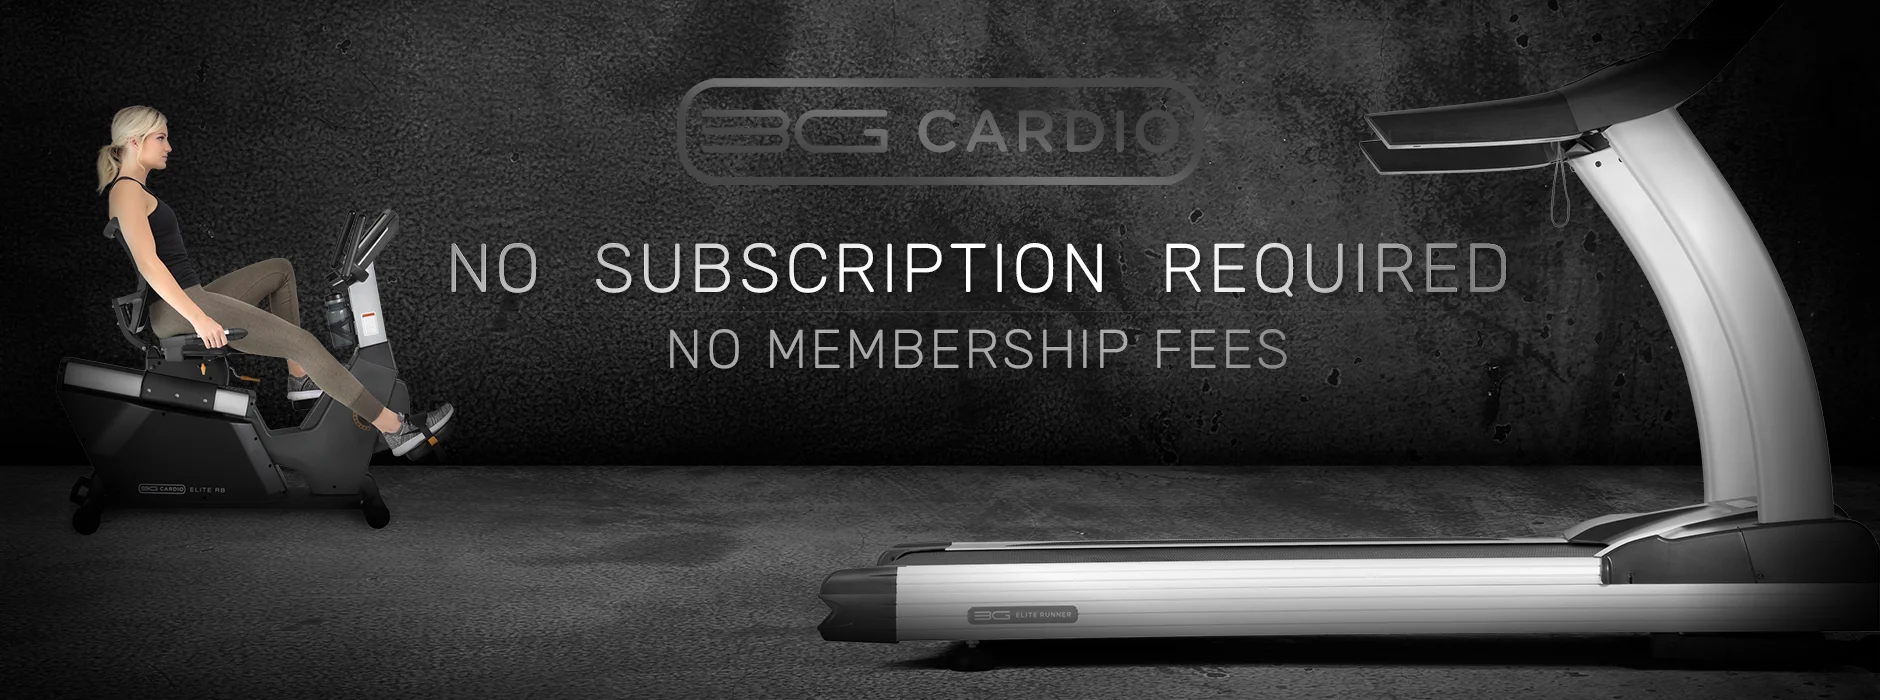 3G Cardio products have no subscription required and no membership fees